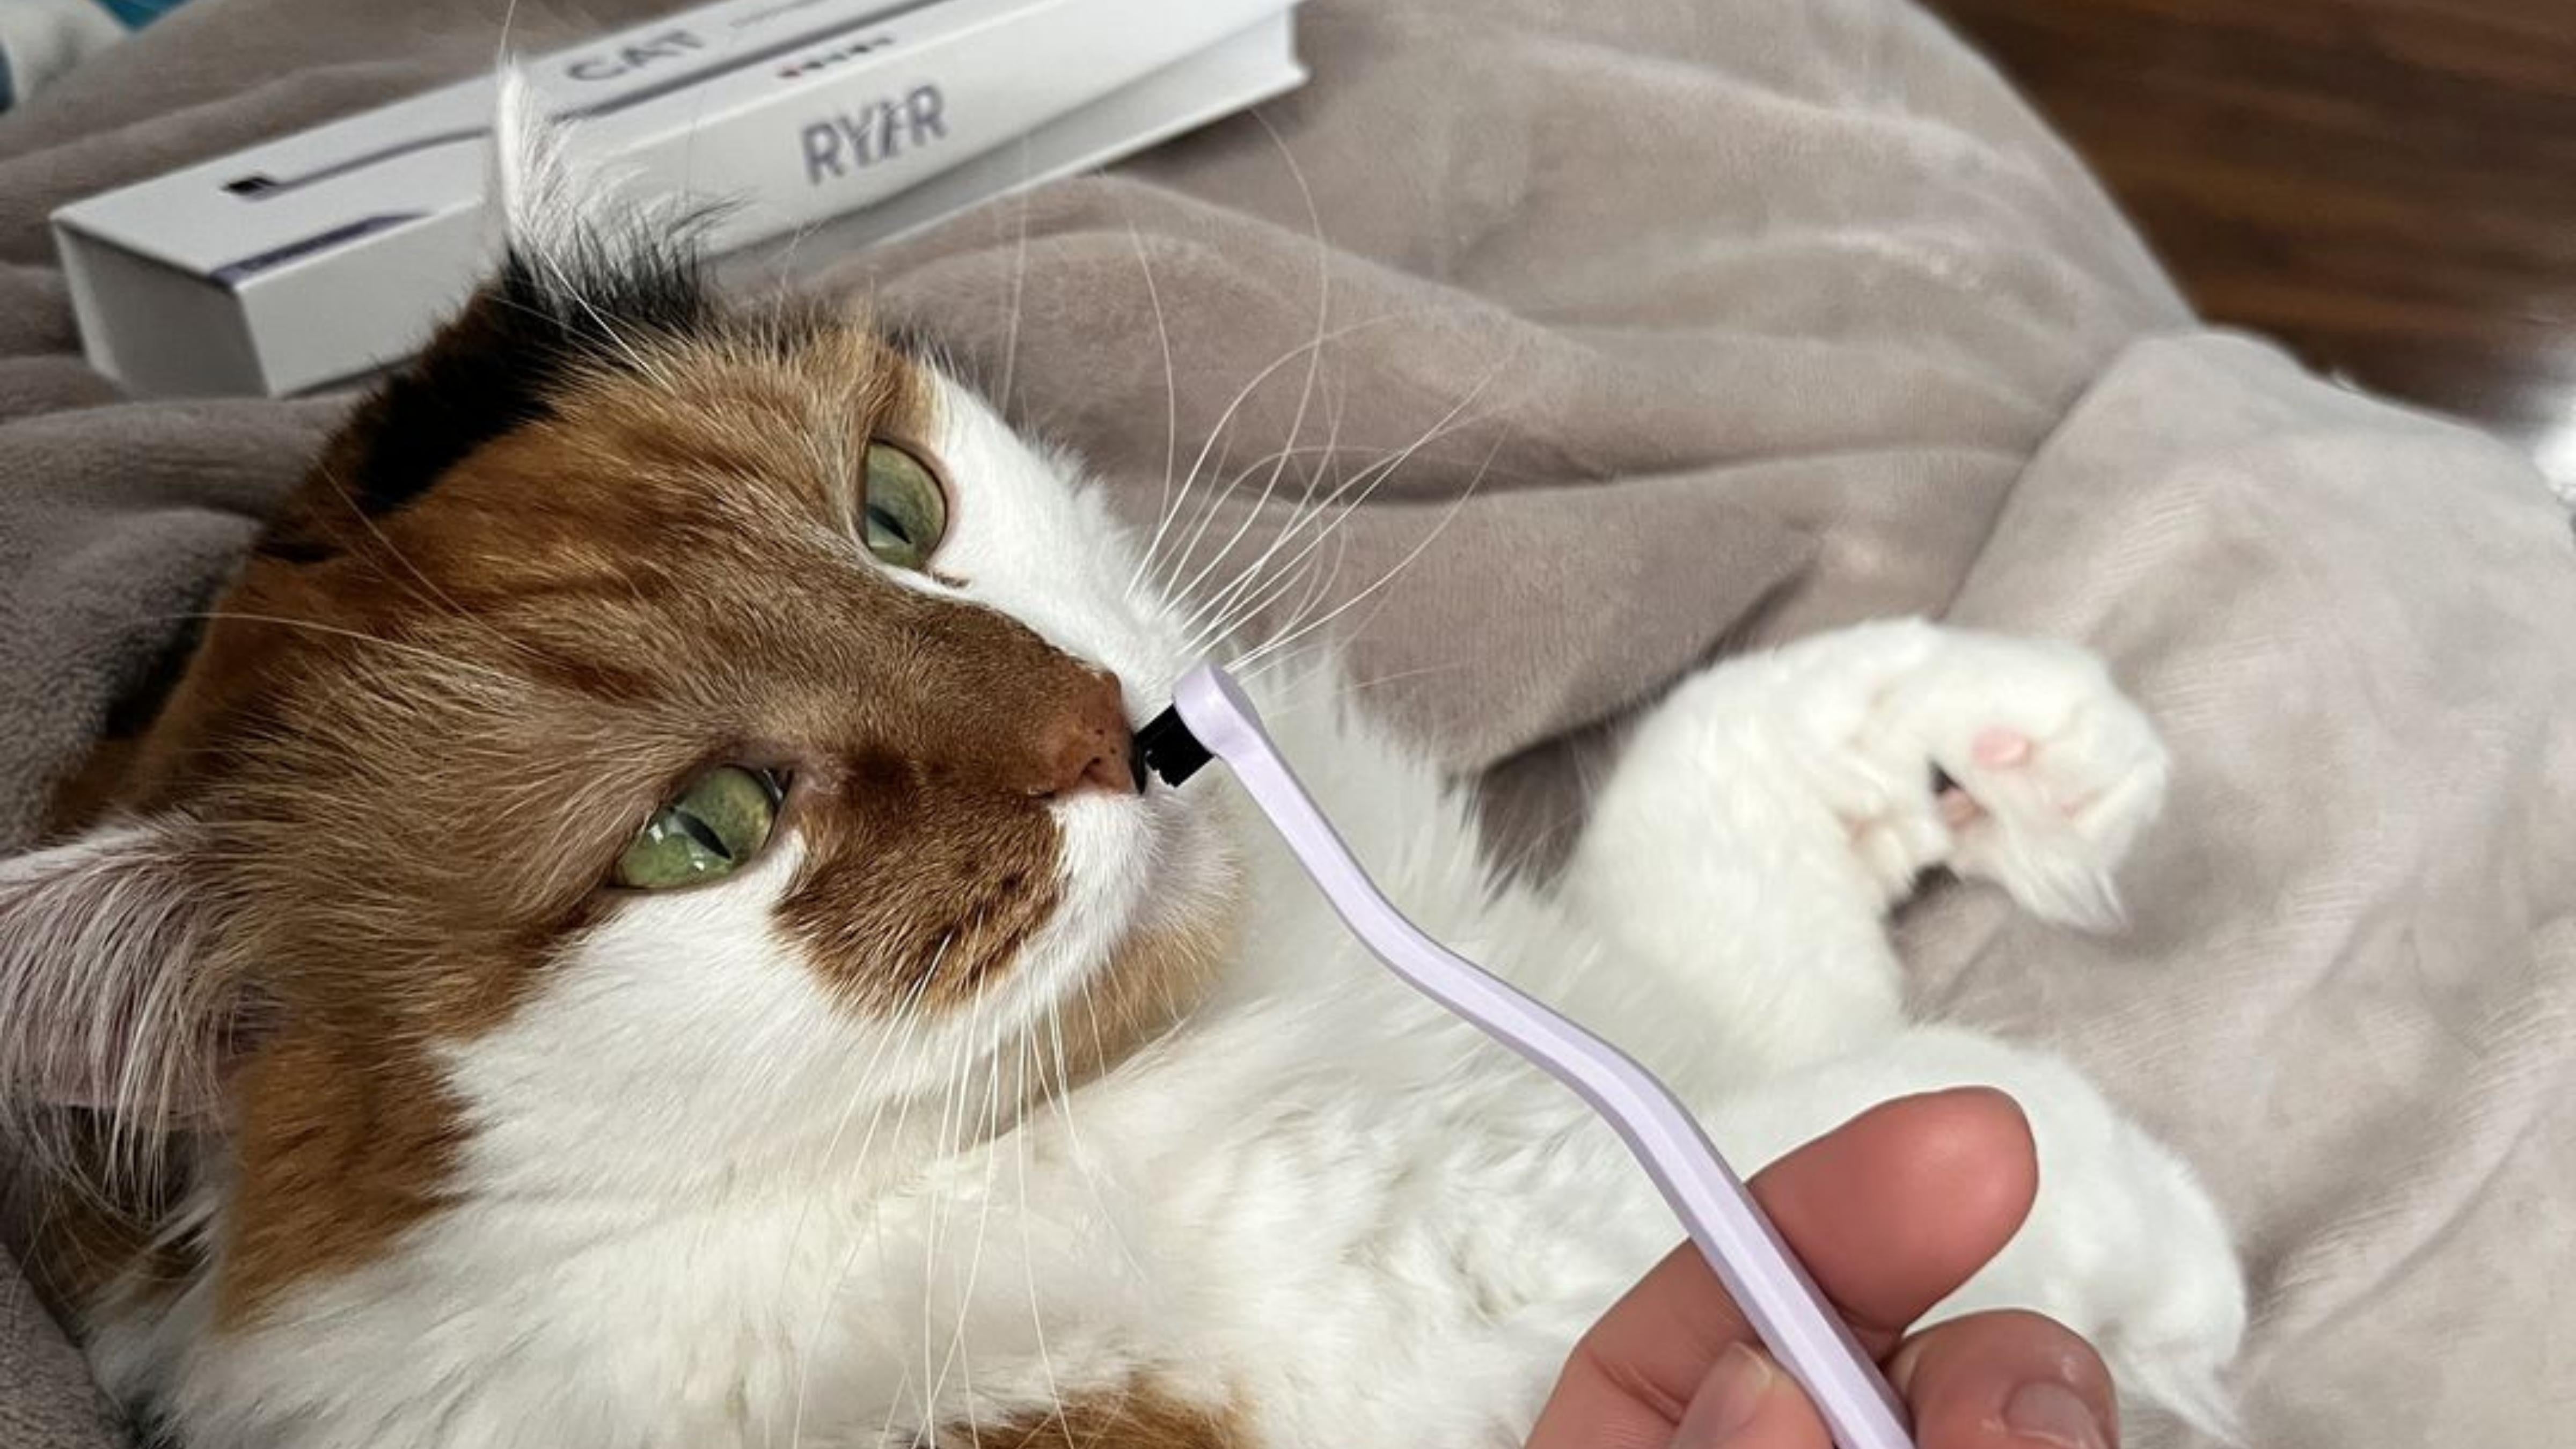 so excited to give this a try, it's the most beautiful little toothbrush i've ever seen! my well mannered kitty luckily allows me to brush her teeth, she was already trying to chew on it as soon as i took it out of the box! it arrived on time, nice packaging too! now to go find some kitty toothpaste :)